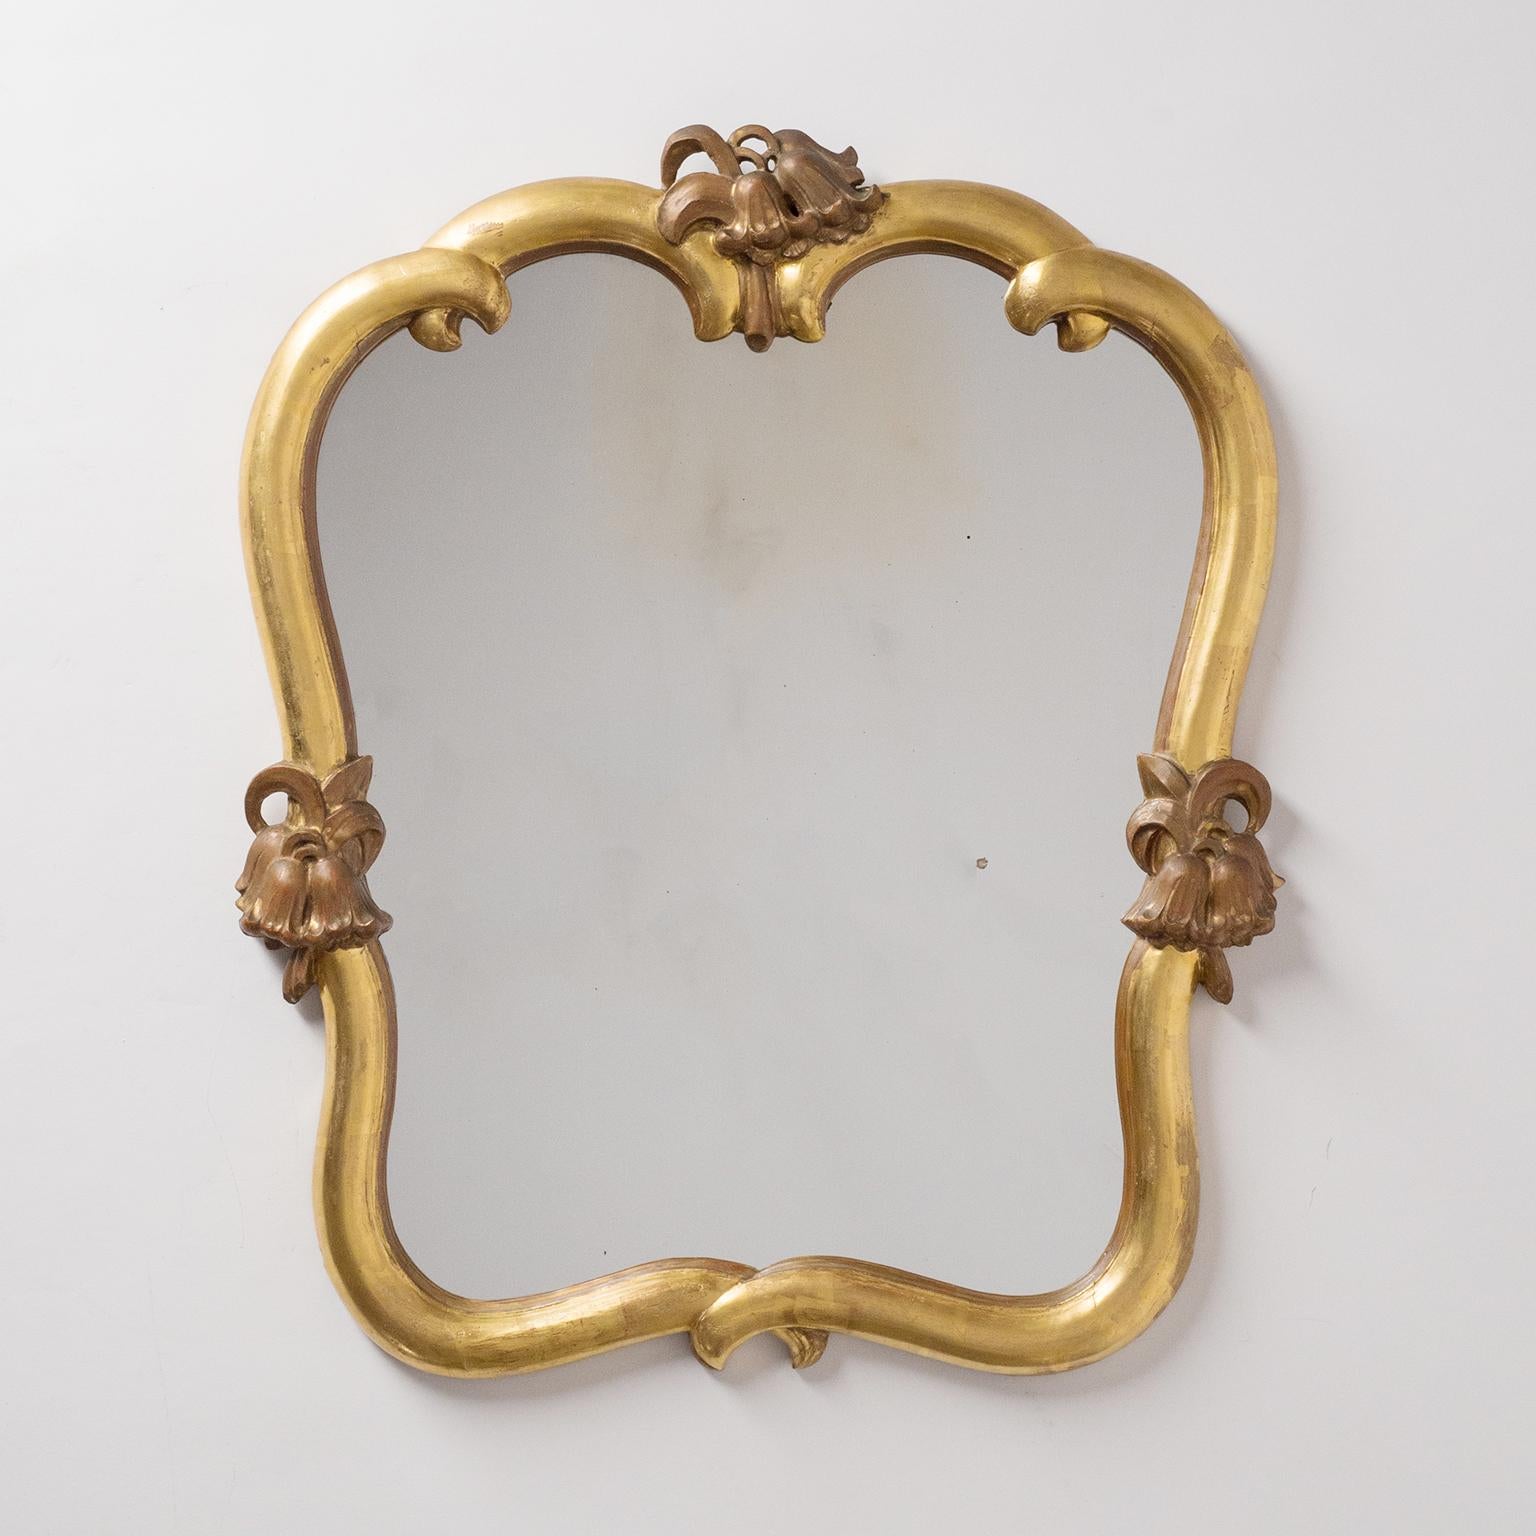 Rare pair of giltwood mirrors by Max Welz, circa 1930. Carved limewood with leaf gold and floral decorations - noteworthy is that the floral decor on the top are mirrored. Very good condition (previously retored frames and backplate) with original